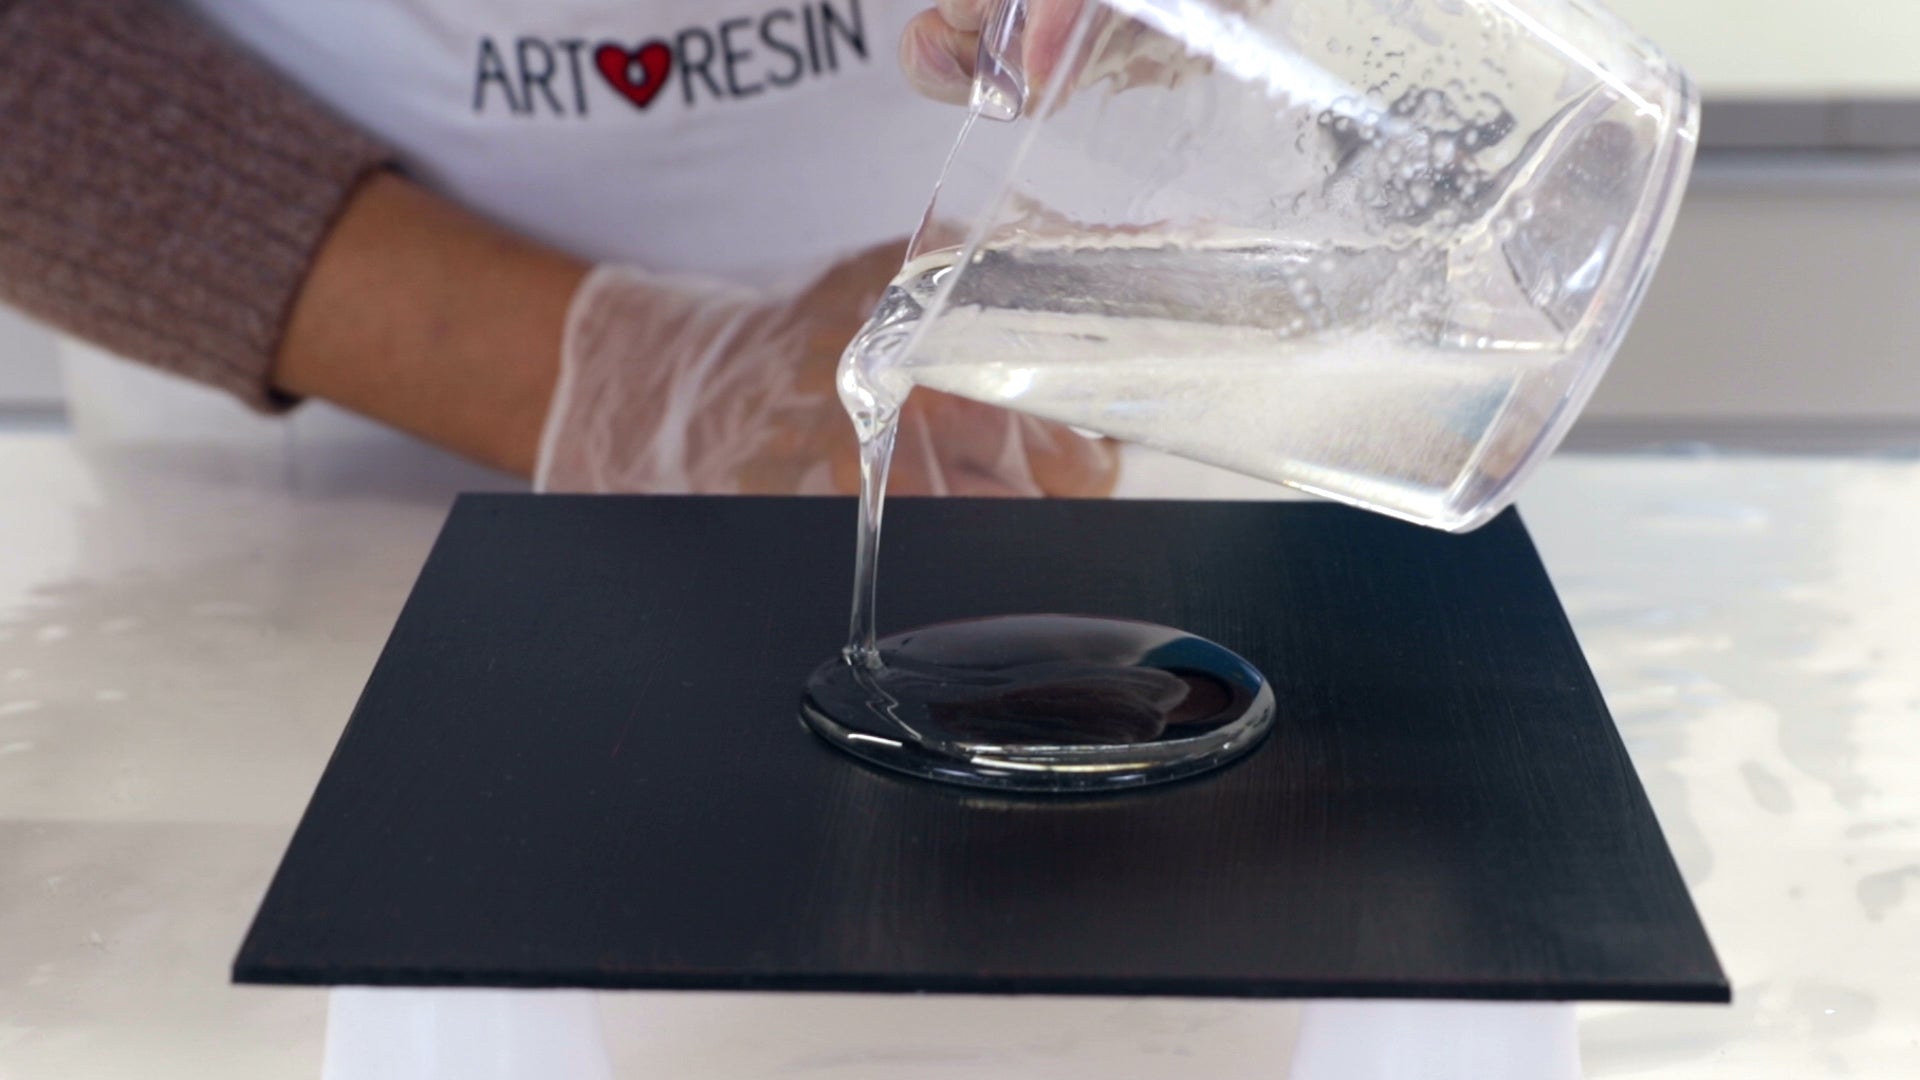 Tips To Prevent Resin Bubbles- Resin that is room temperature or slightly warmer is smooth